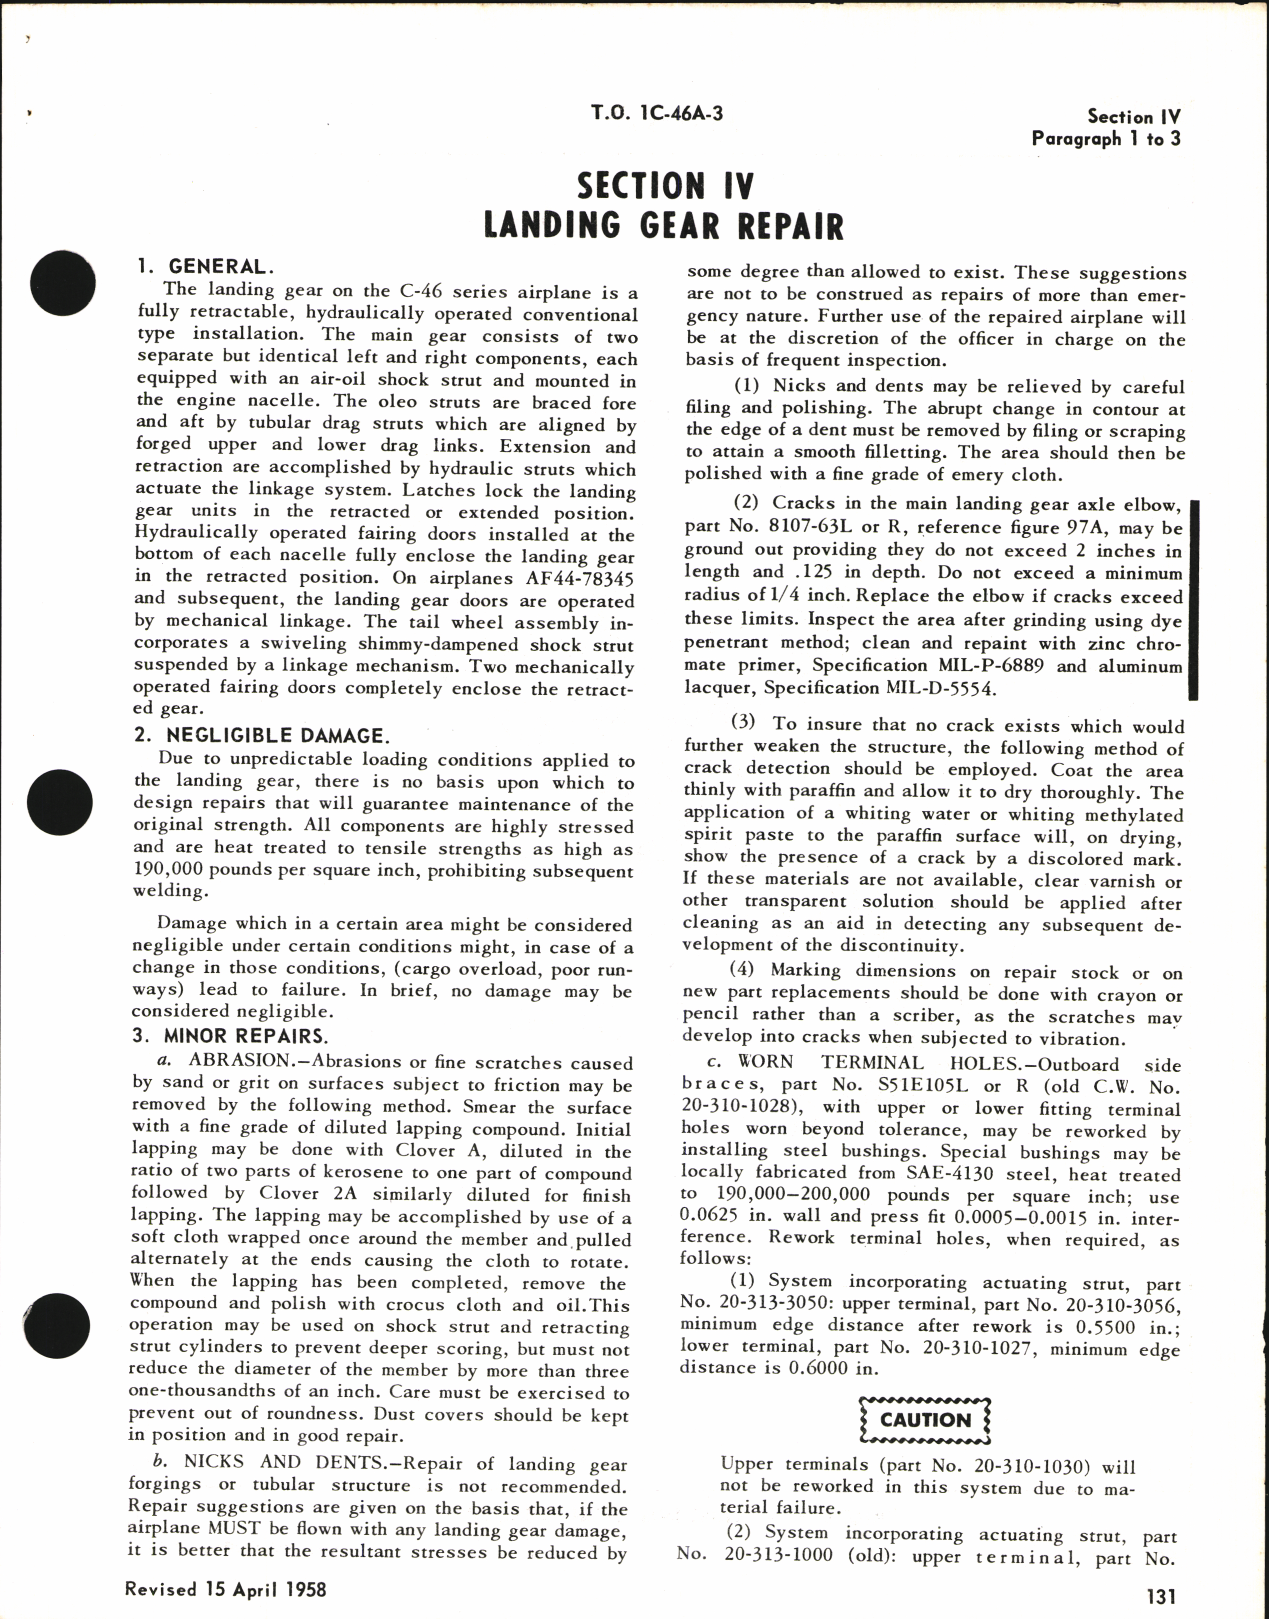 Sample page 7 from AirCorps Library document: Structural Repair Instructions for C-46, ZC-46A, C-46D, and C-46F